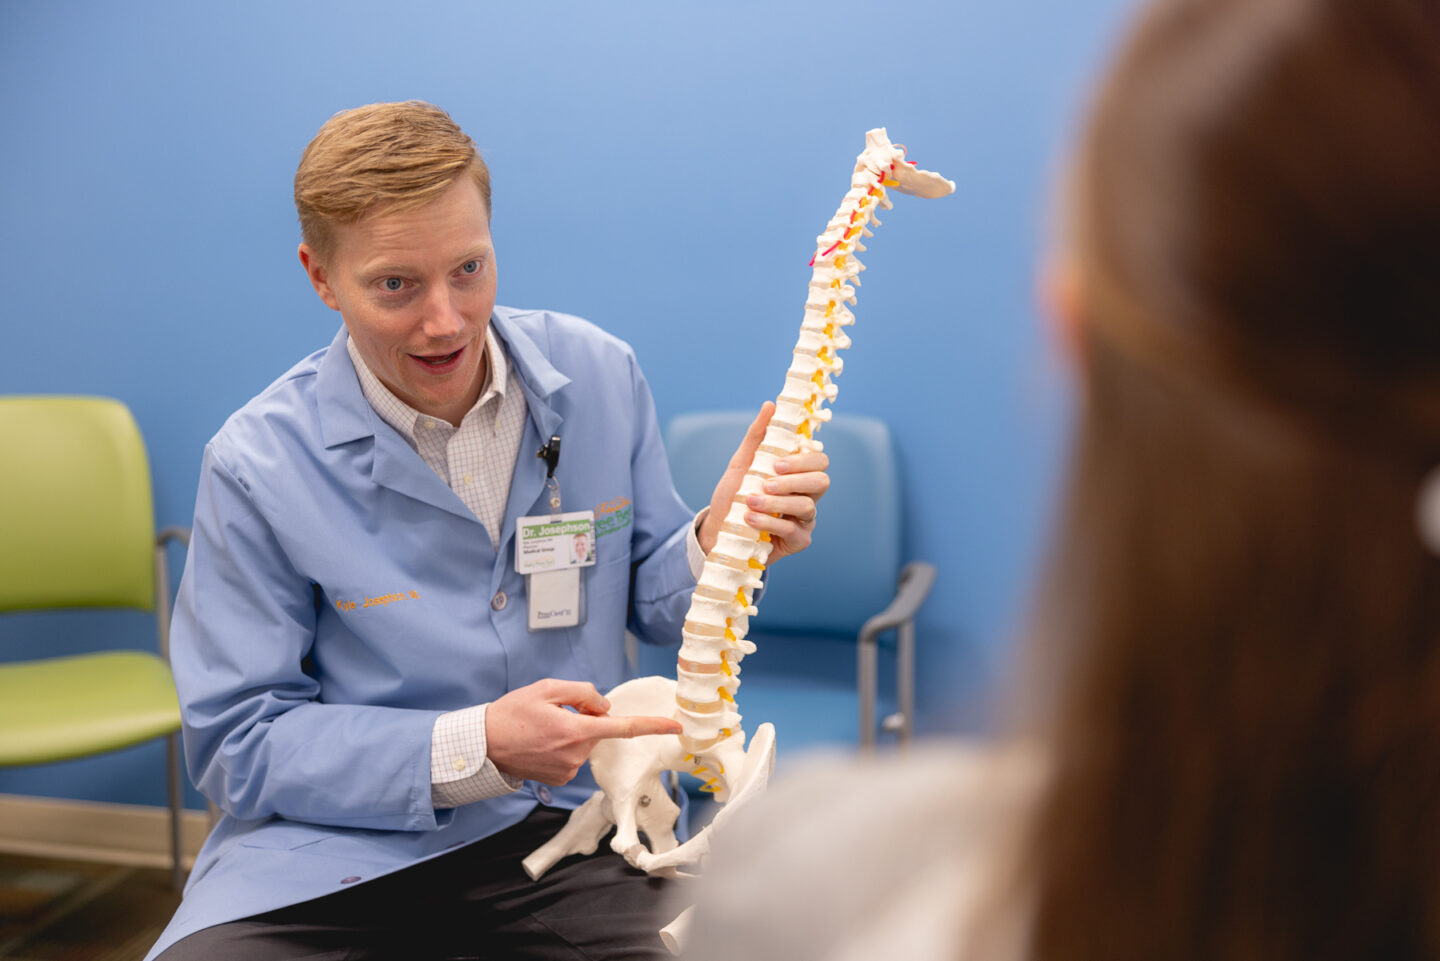 Dr. Kyle Josephson, Mary Free Bed physiatrist, explaining spine anatomy for non-invasive back pain relief.